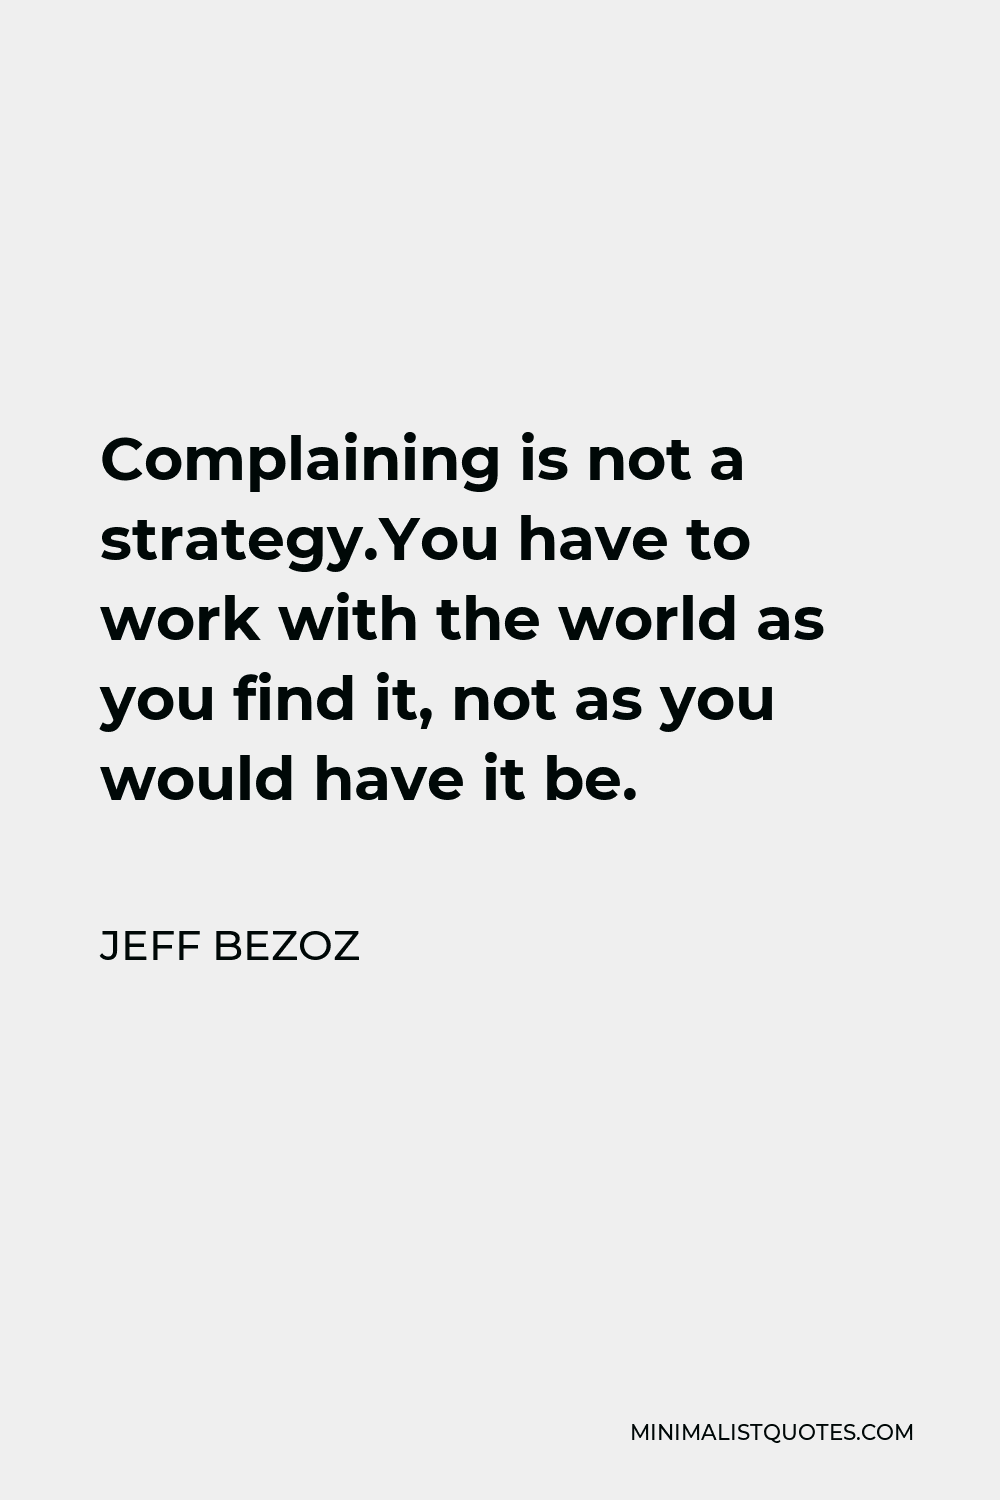 Jeff Bezoz Quote - Complaining is not a strategy.You have to work with the world as you find it, not as you would have it be.